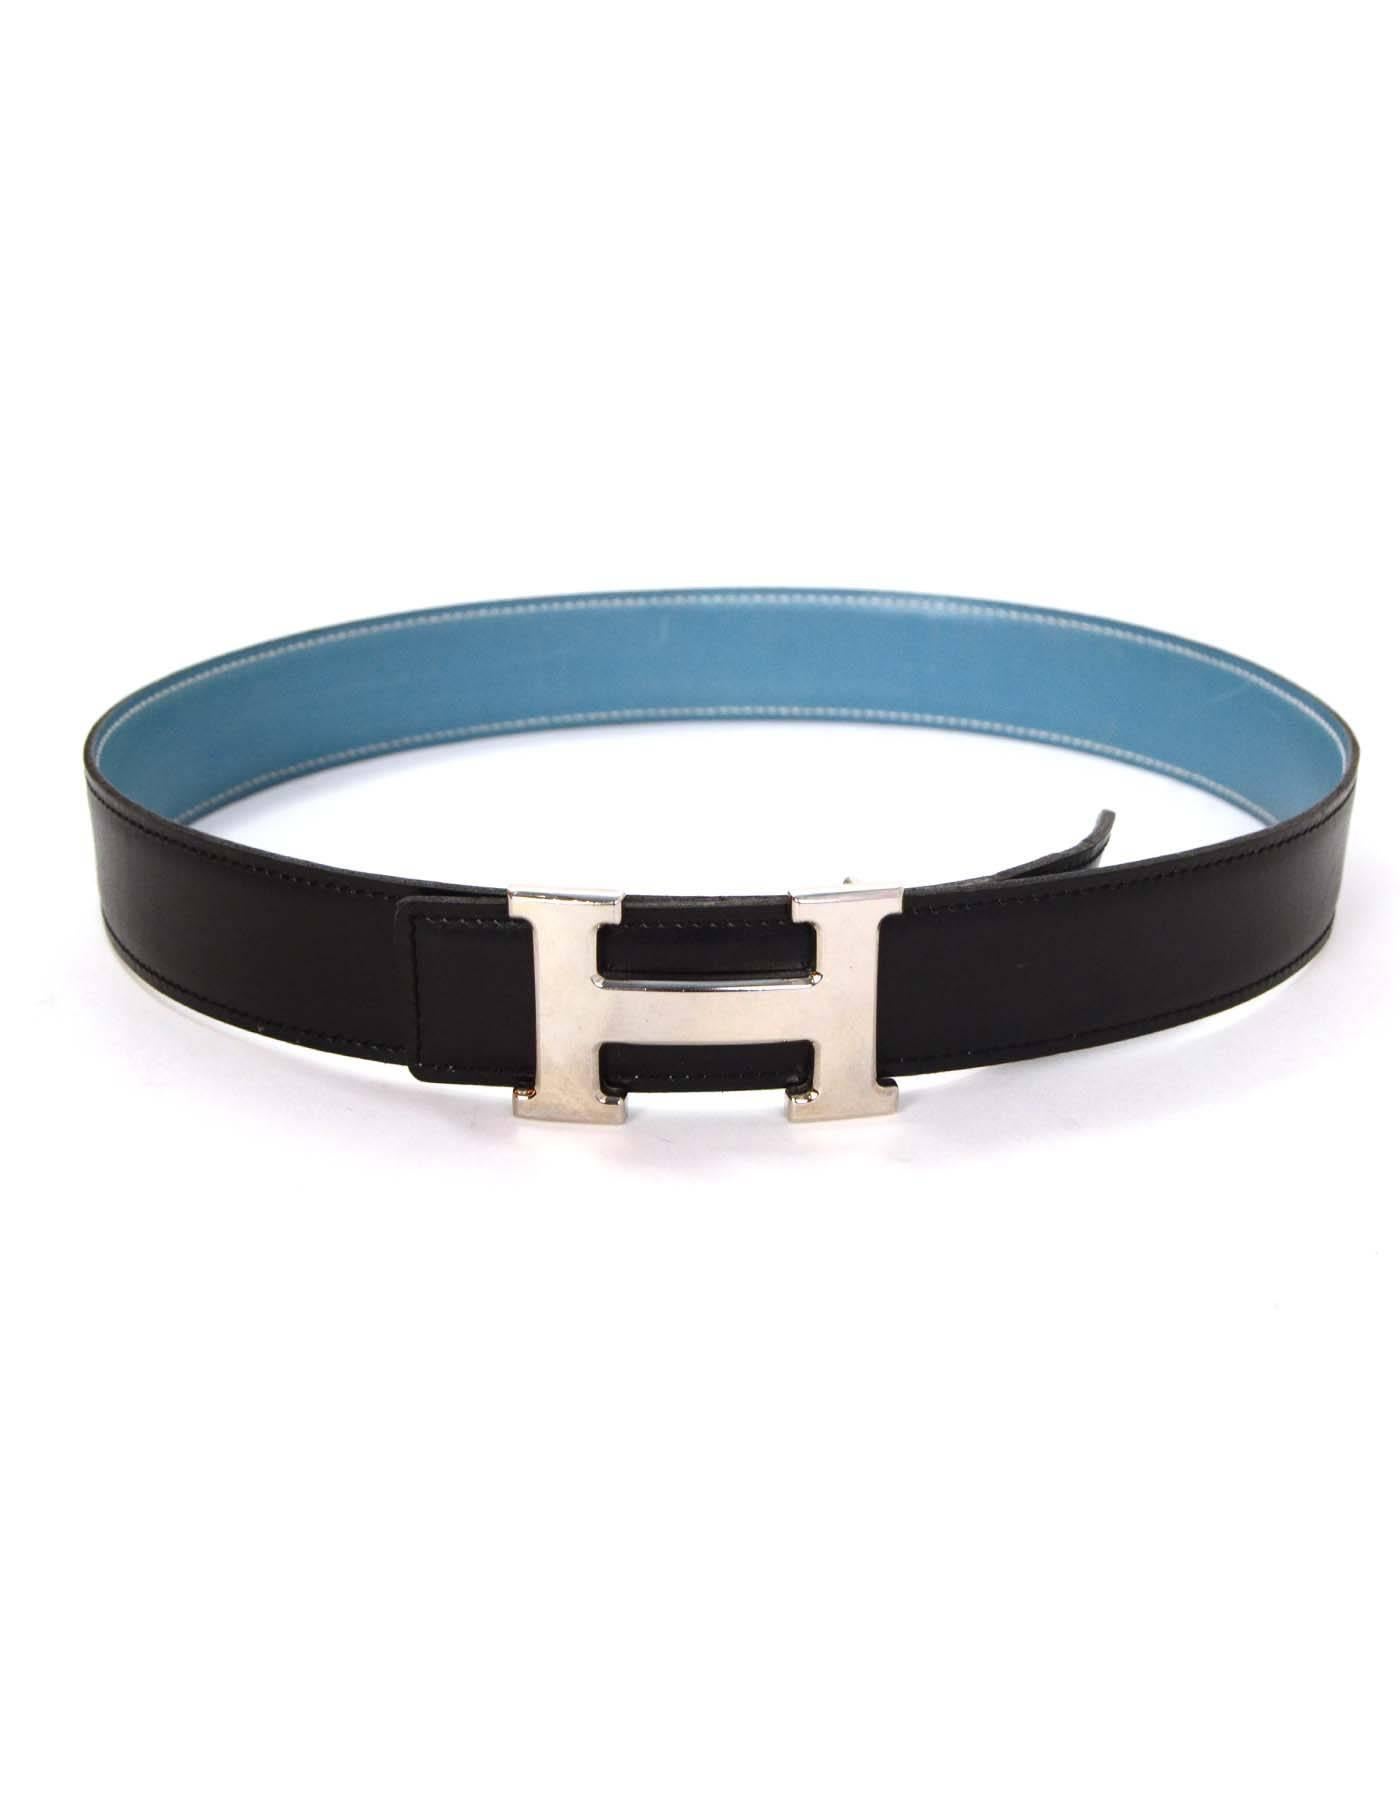 Hermes Vintage '99 Black & Blue Leather H Leather Belt sz 70 PHW
Features ivory contrast stitching on blue side of belt and reversible H buckle

Made In: France
Year of Production: 1999
Color: Black and blue
Materials: Epsom leather and metal